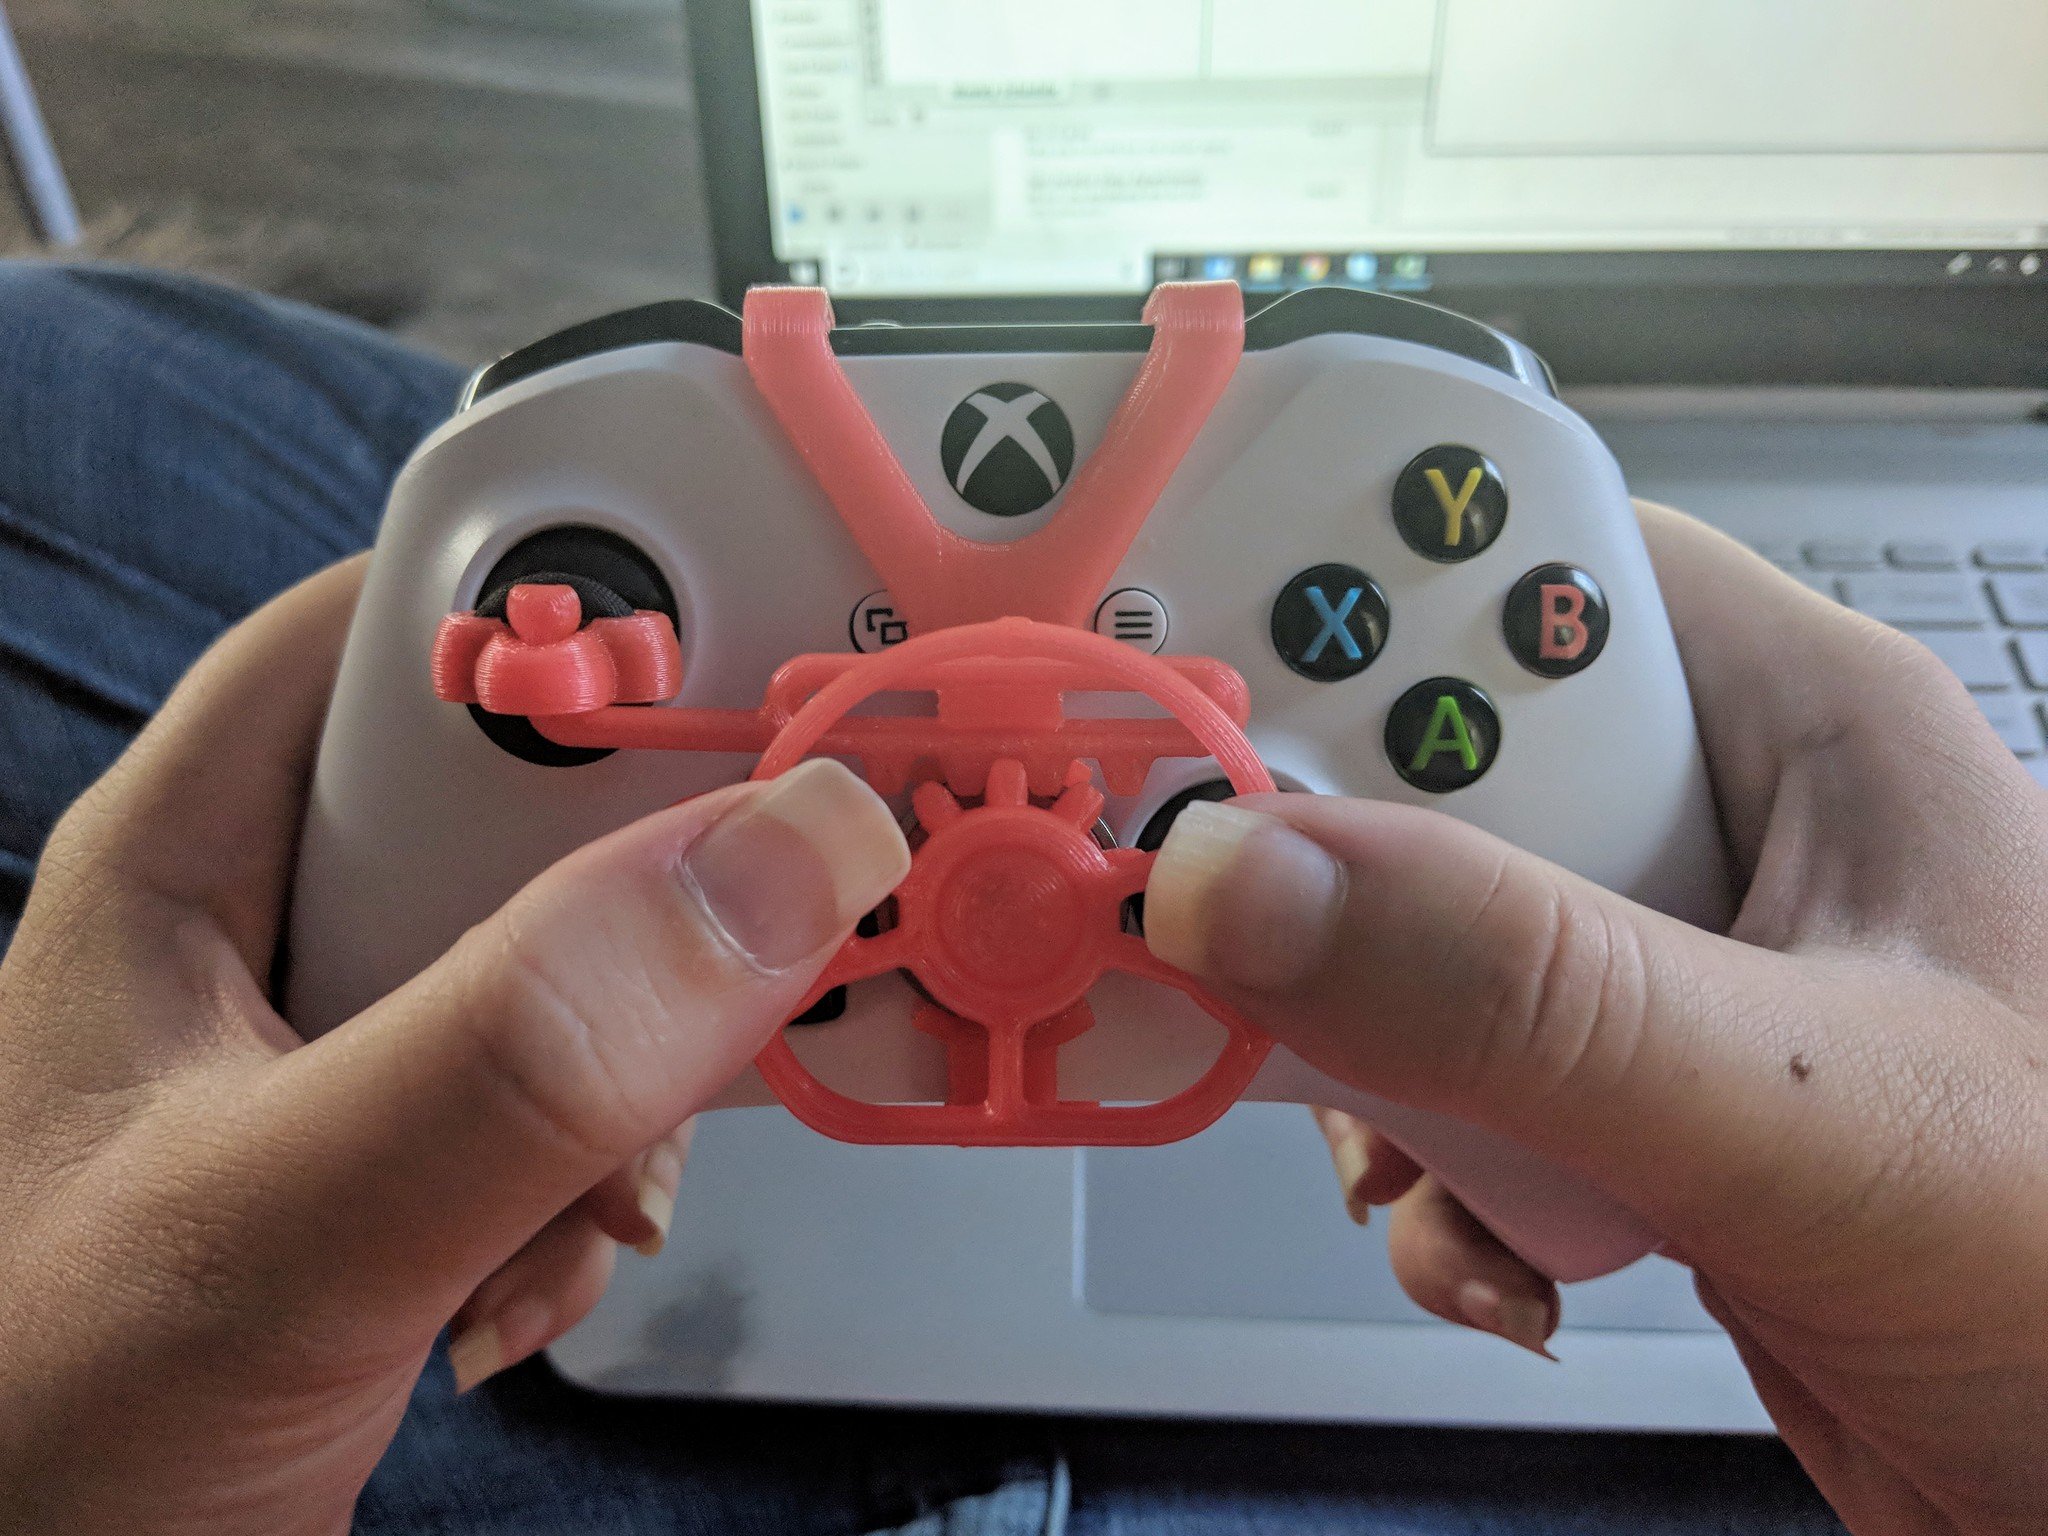 https://www.windowscentral.com/sites/wpcentral.com/files/styles/xlarge/public/field/image/2018/08/xbox-3dprinted-steering.jpg?itok=7S1C9fEN